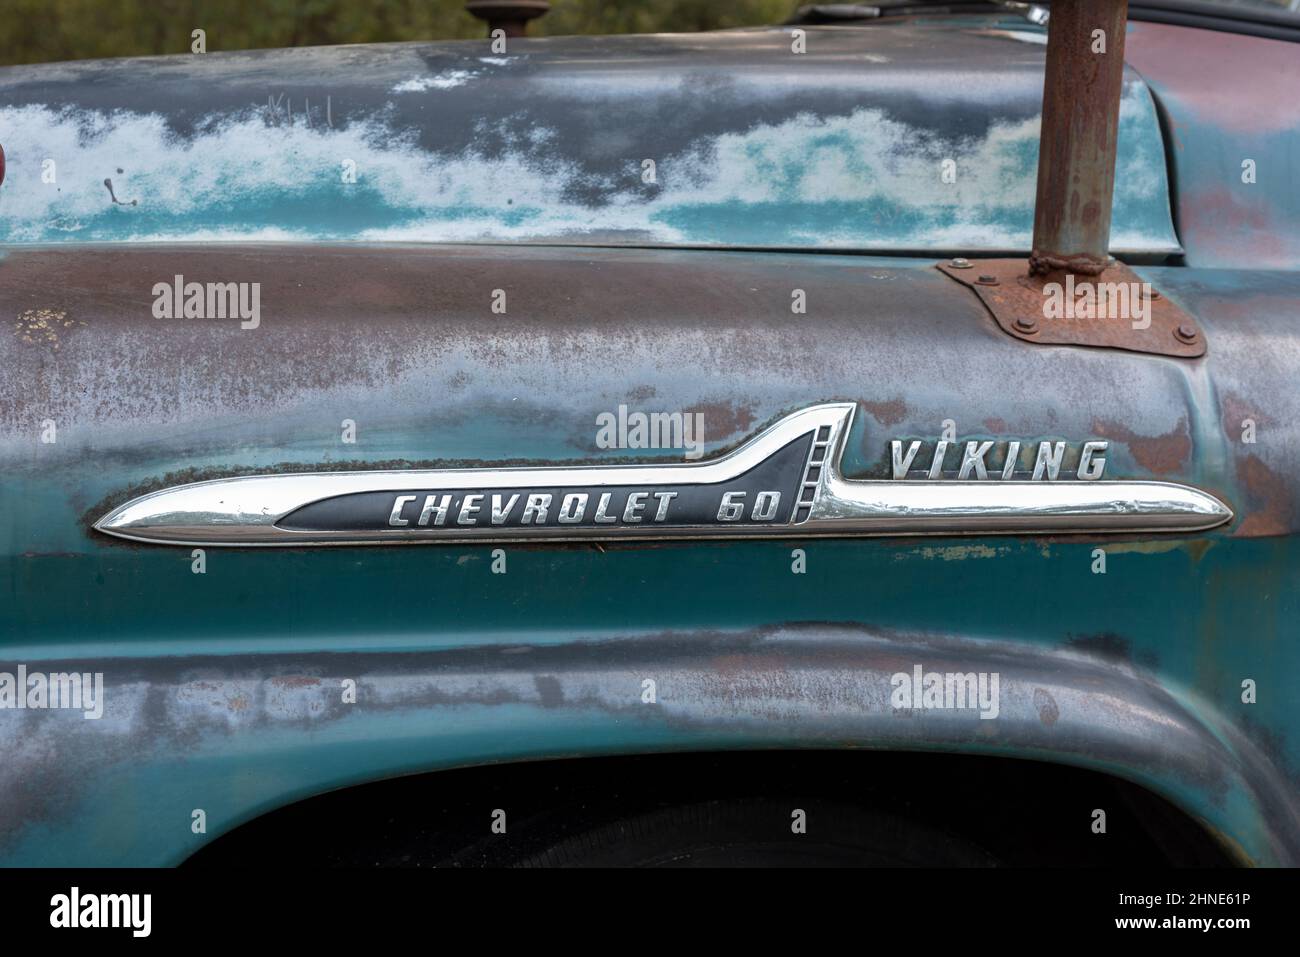 Emblem on a Chevrolet 60 Viking truck, the metal on the pickup a greenish blue and brown patina. Stock Photo